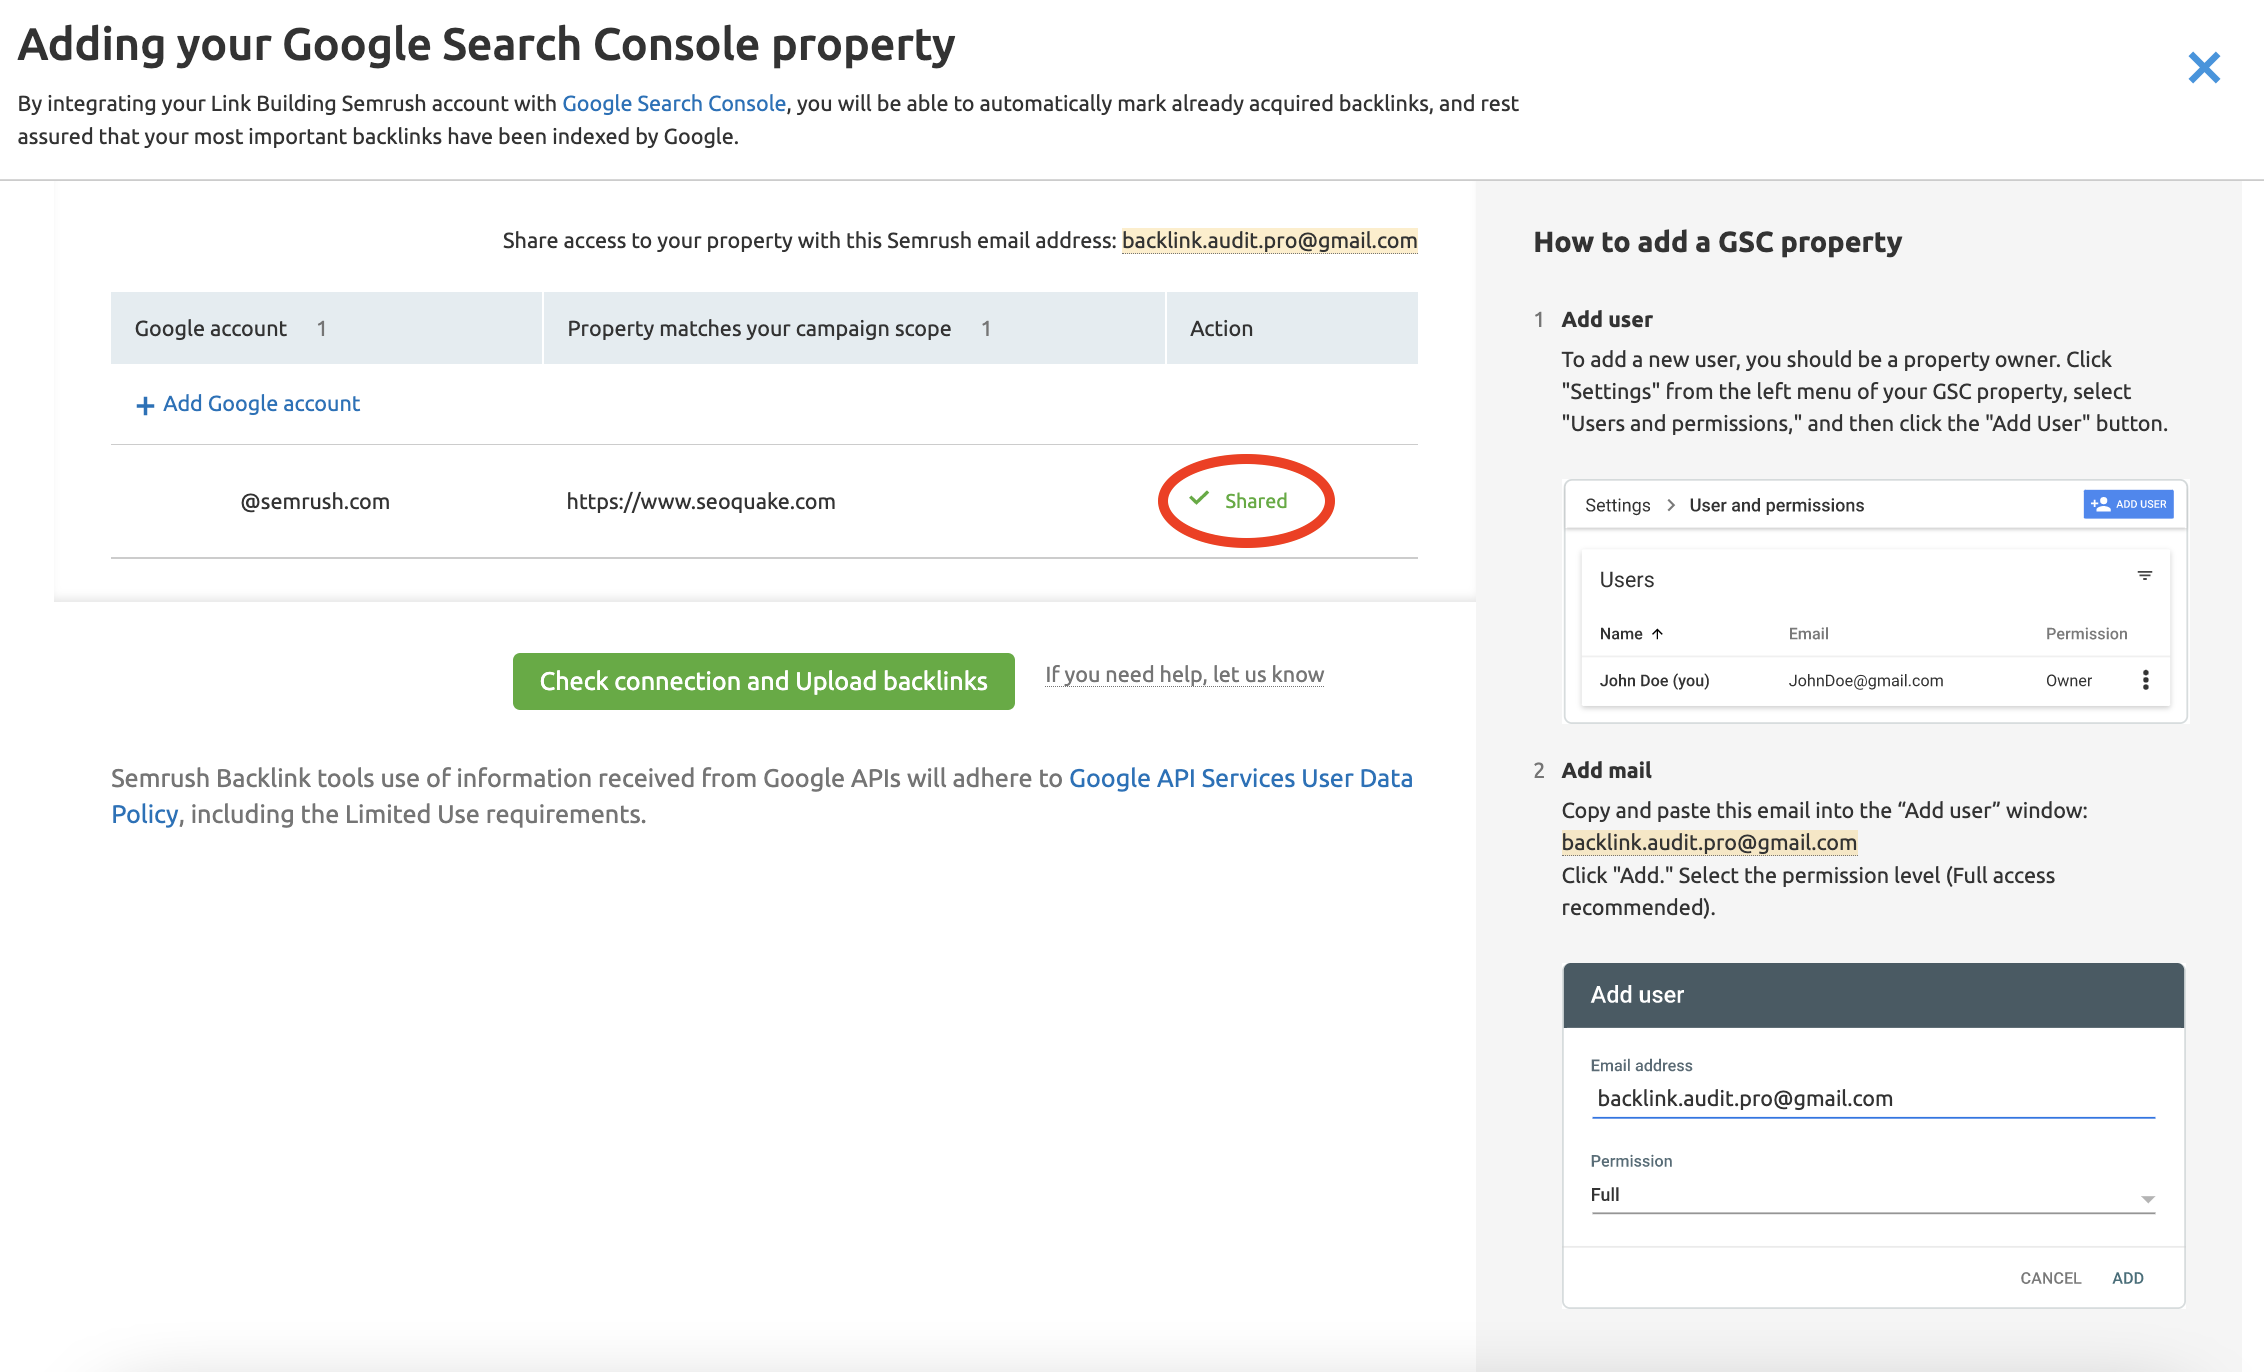 Connecting Link Building Tool with Google Search Console image 2